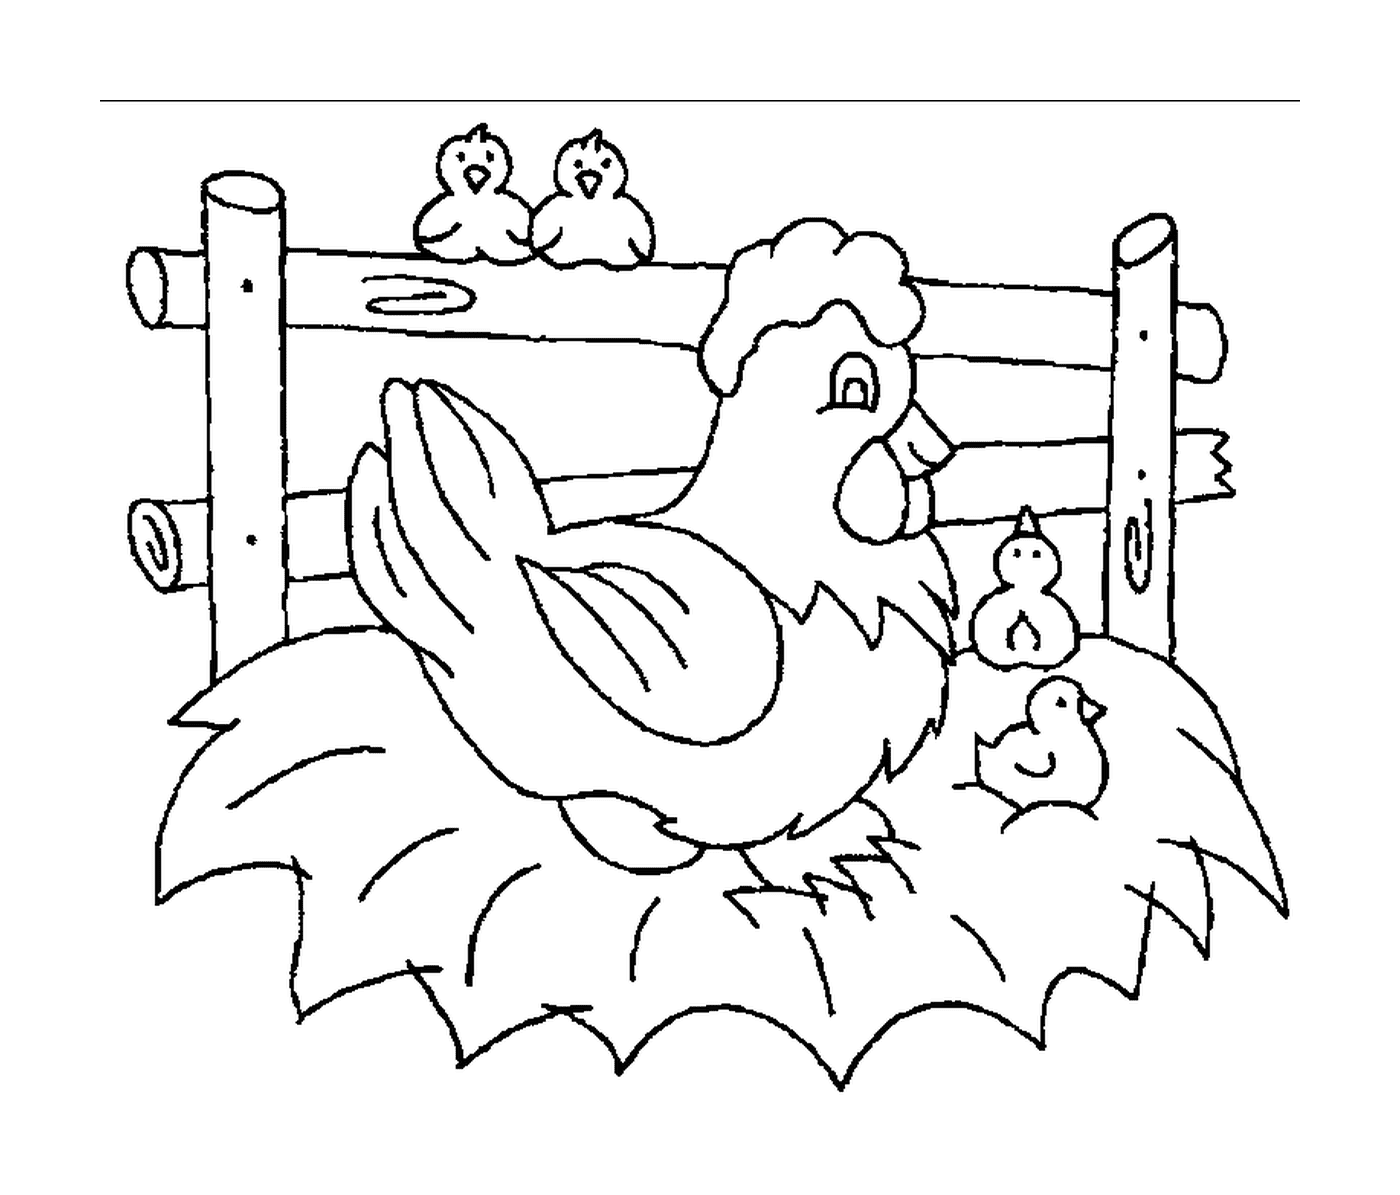  Chicken brood with chicks 